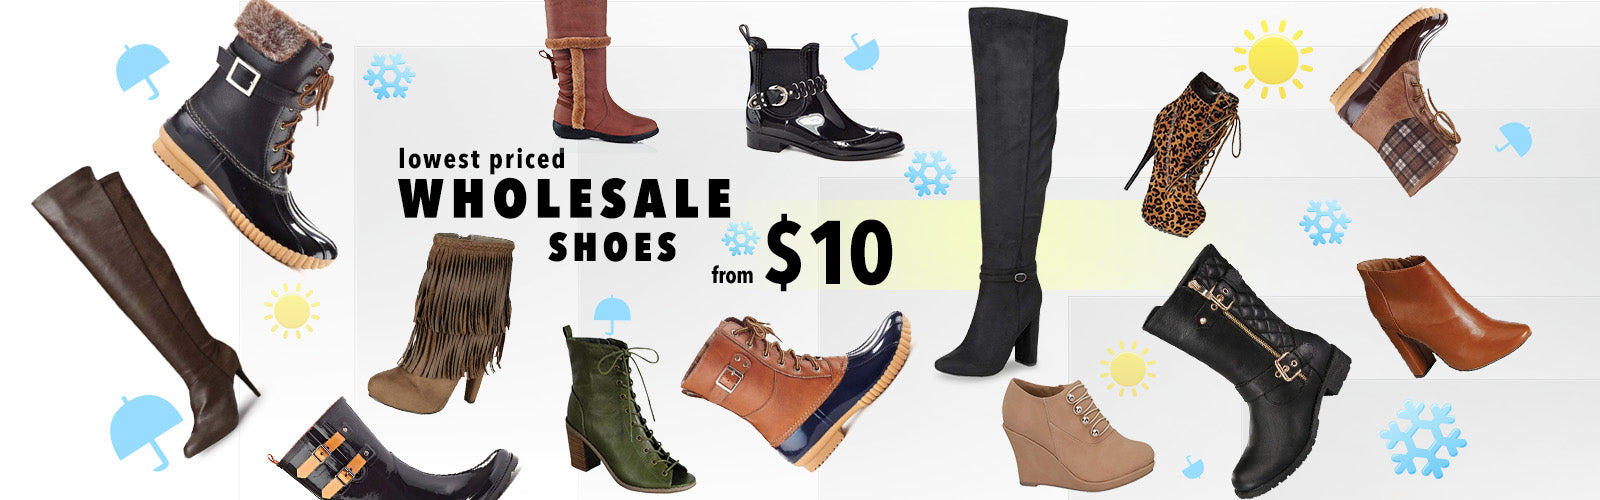 wholesale boots and shoes